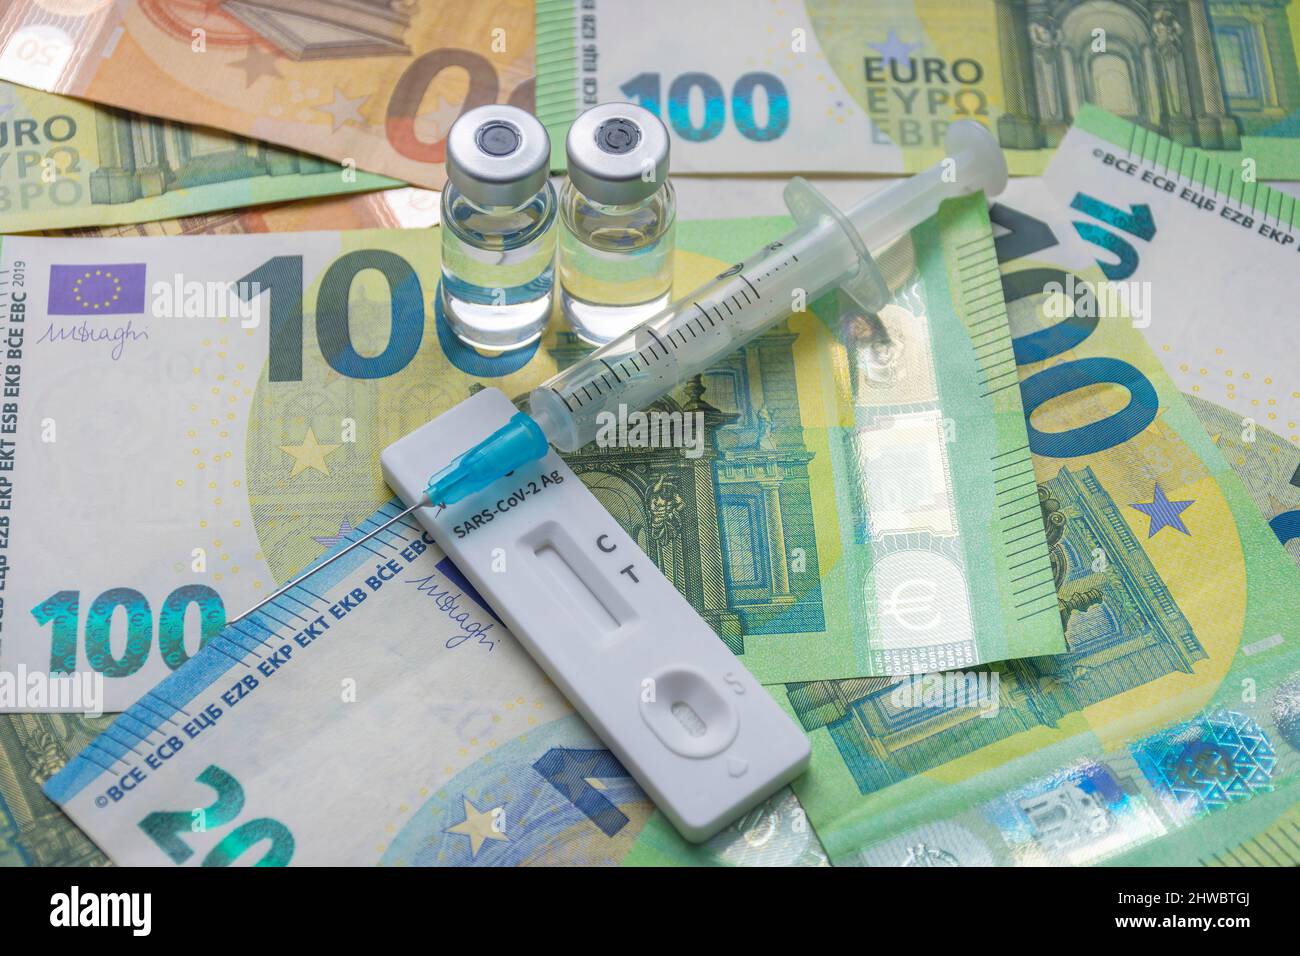 Money (Euro currency banknotes) with medical mask, antigen test, vaccine bottles and syringe. Financial crisis due to Coronavirus losses, selective fo Stock Photo